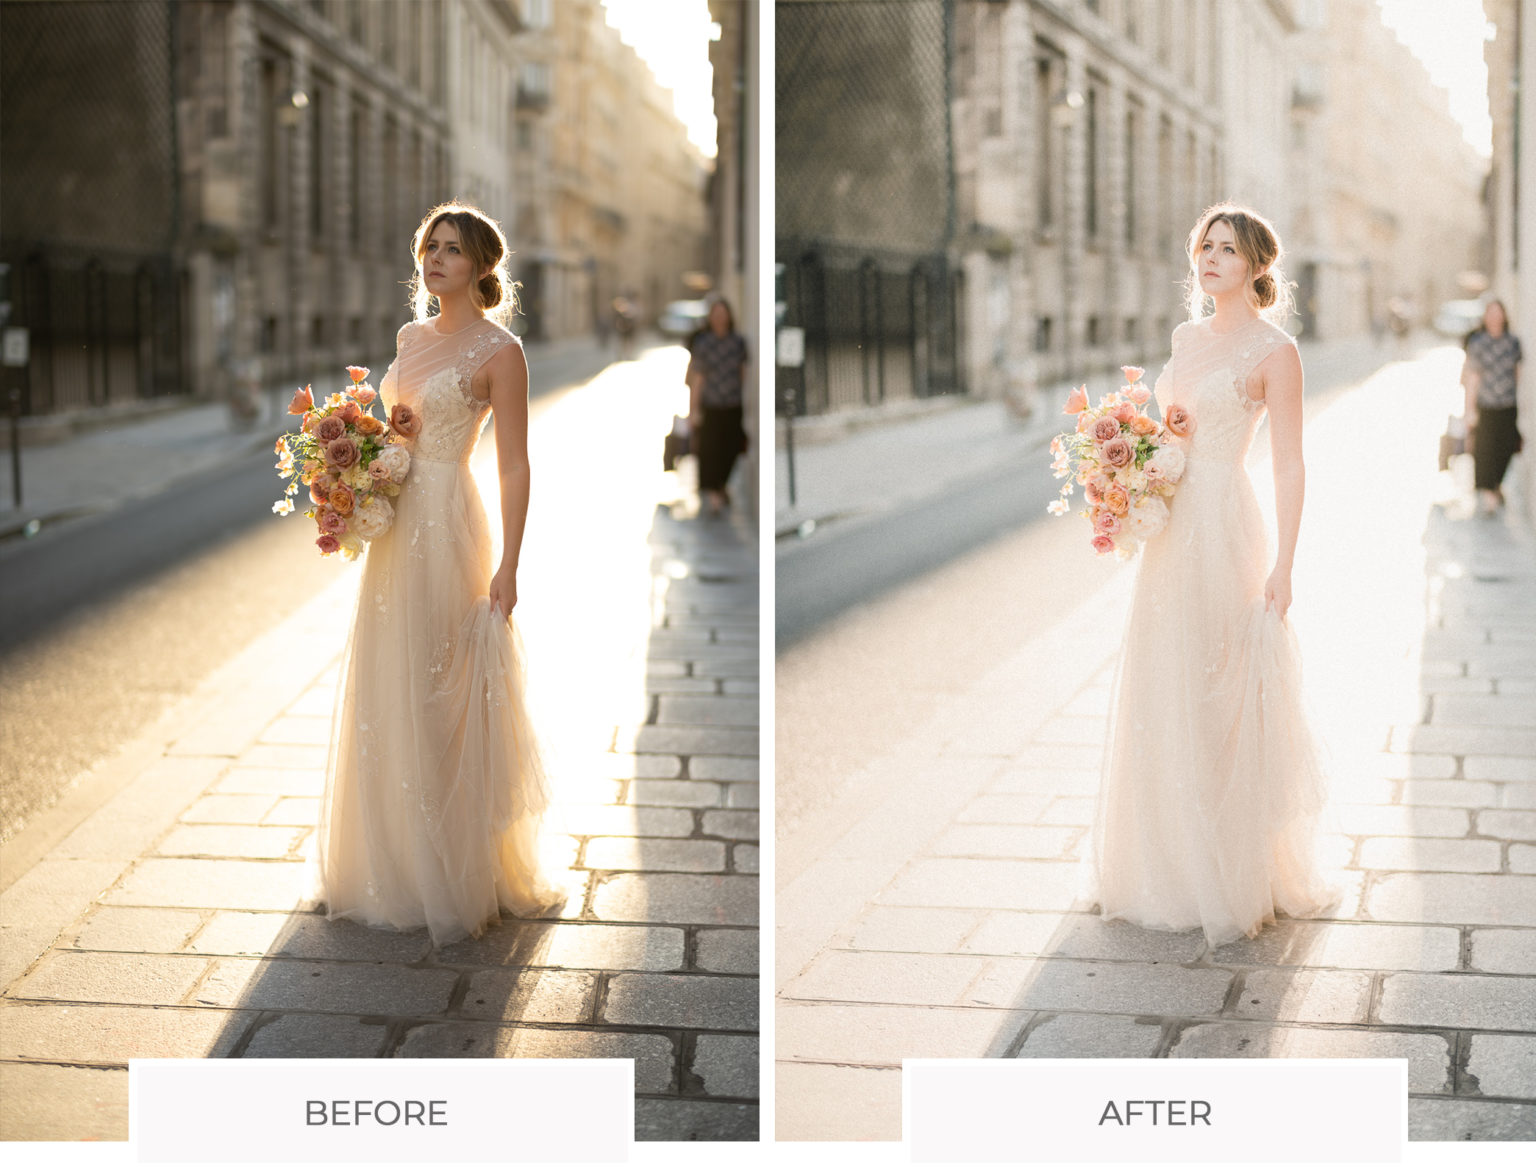 light and airy presets